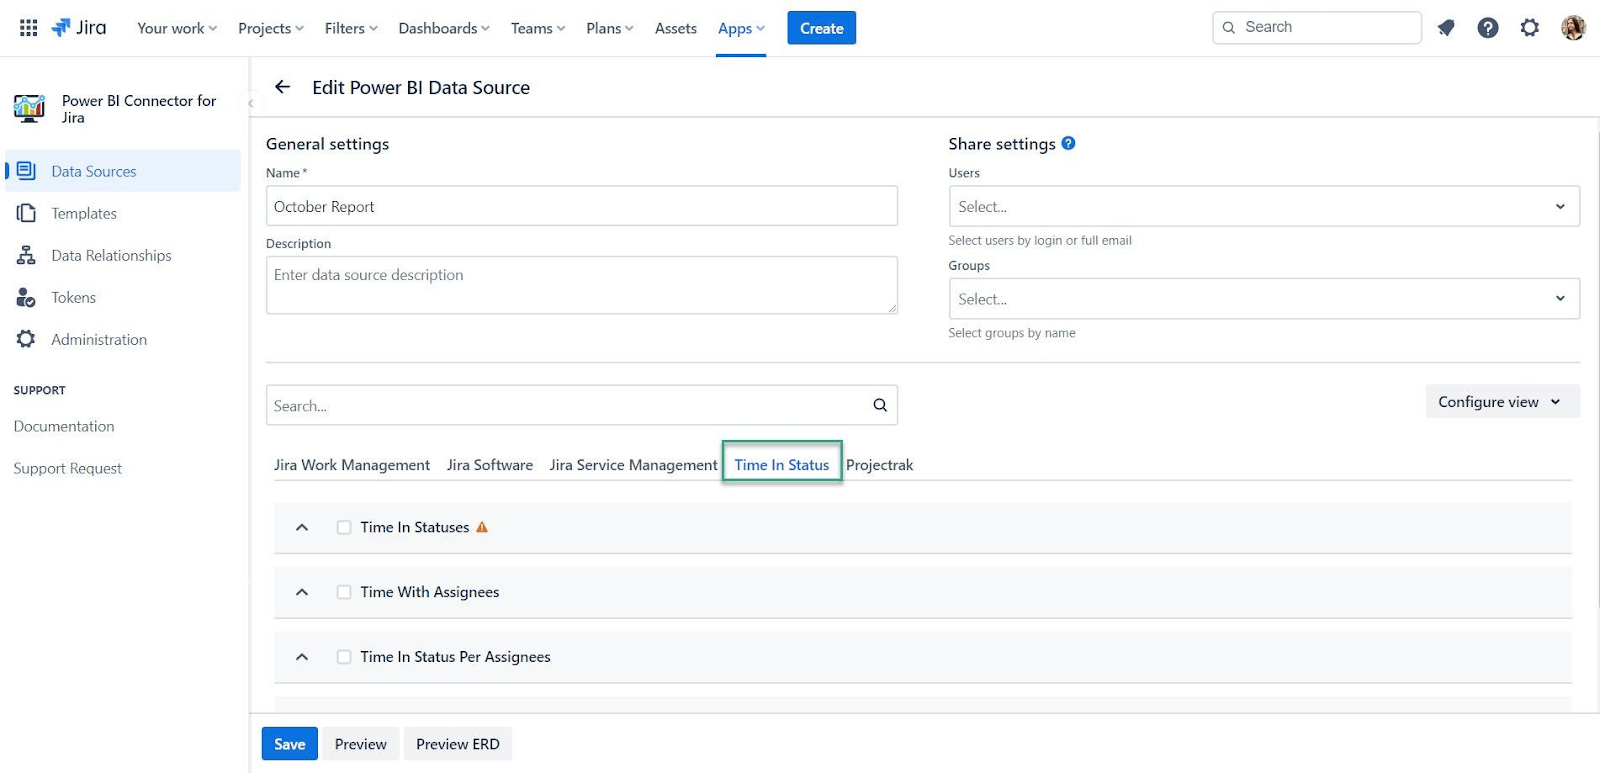 Analyzing and Exporting Data from Jira Apps made Easy - Time in Status options